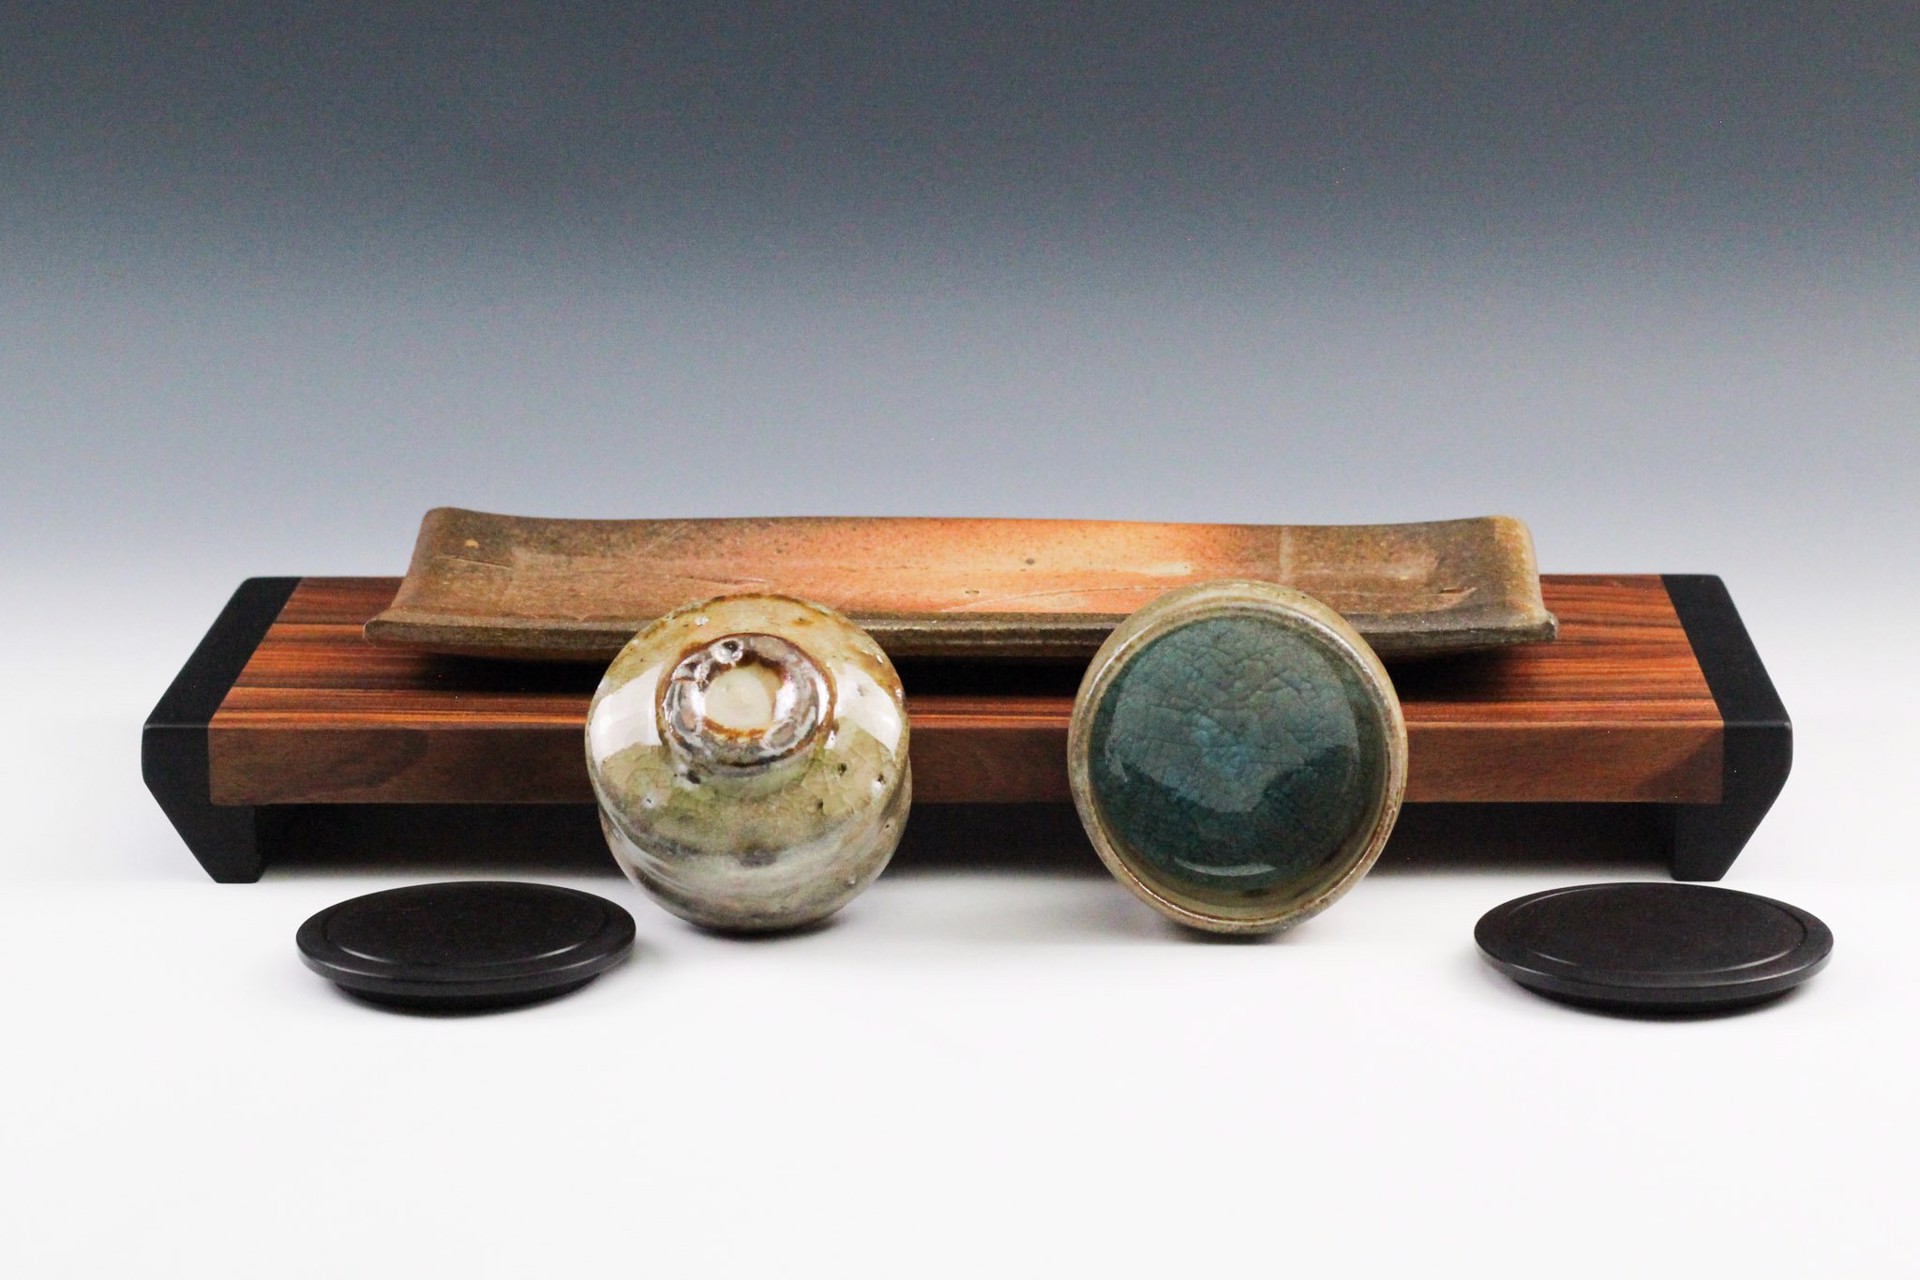 Sushi Tray & Dipping Dishes by Reid Schoonover